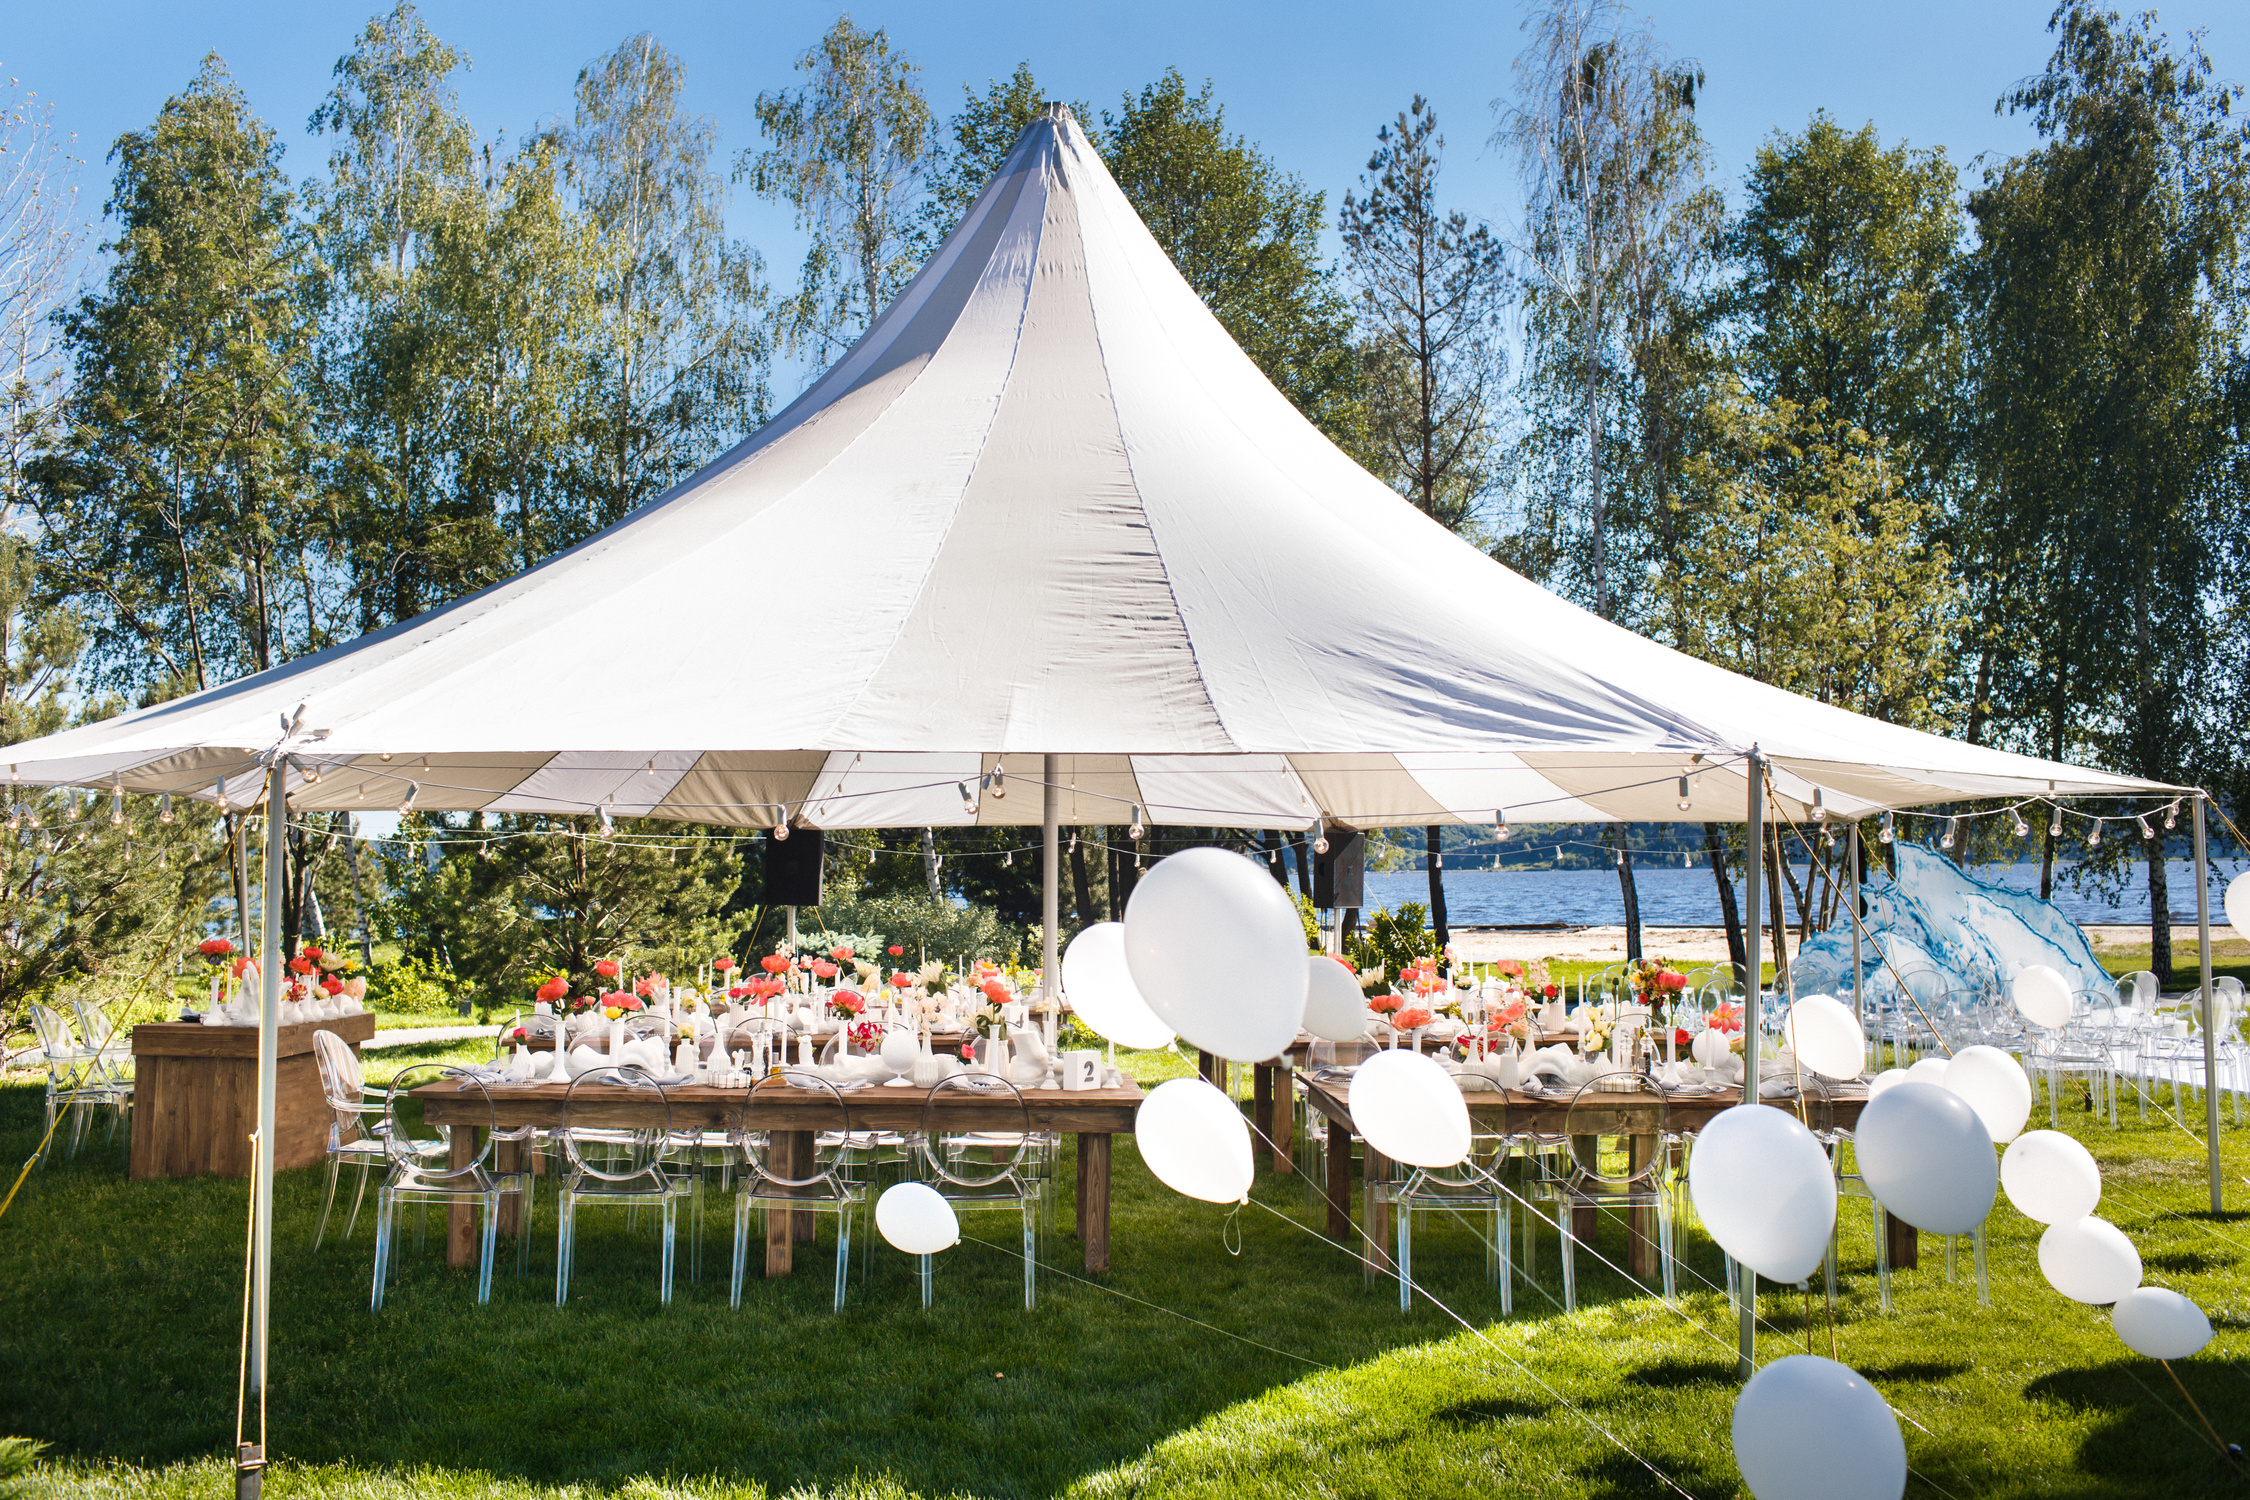 Wedding tent with large balls. Tables sets for wedding